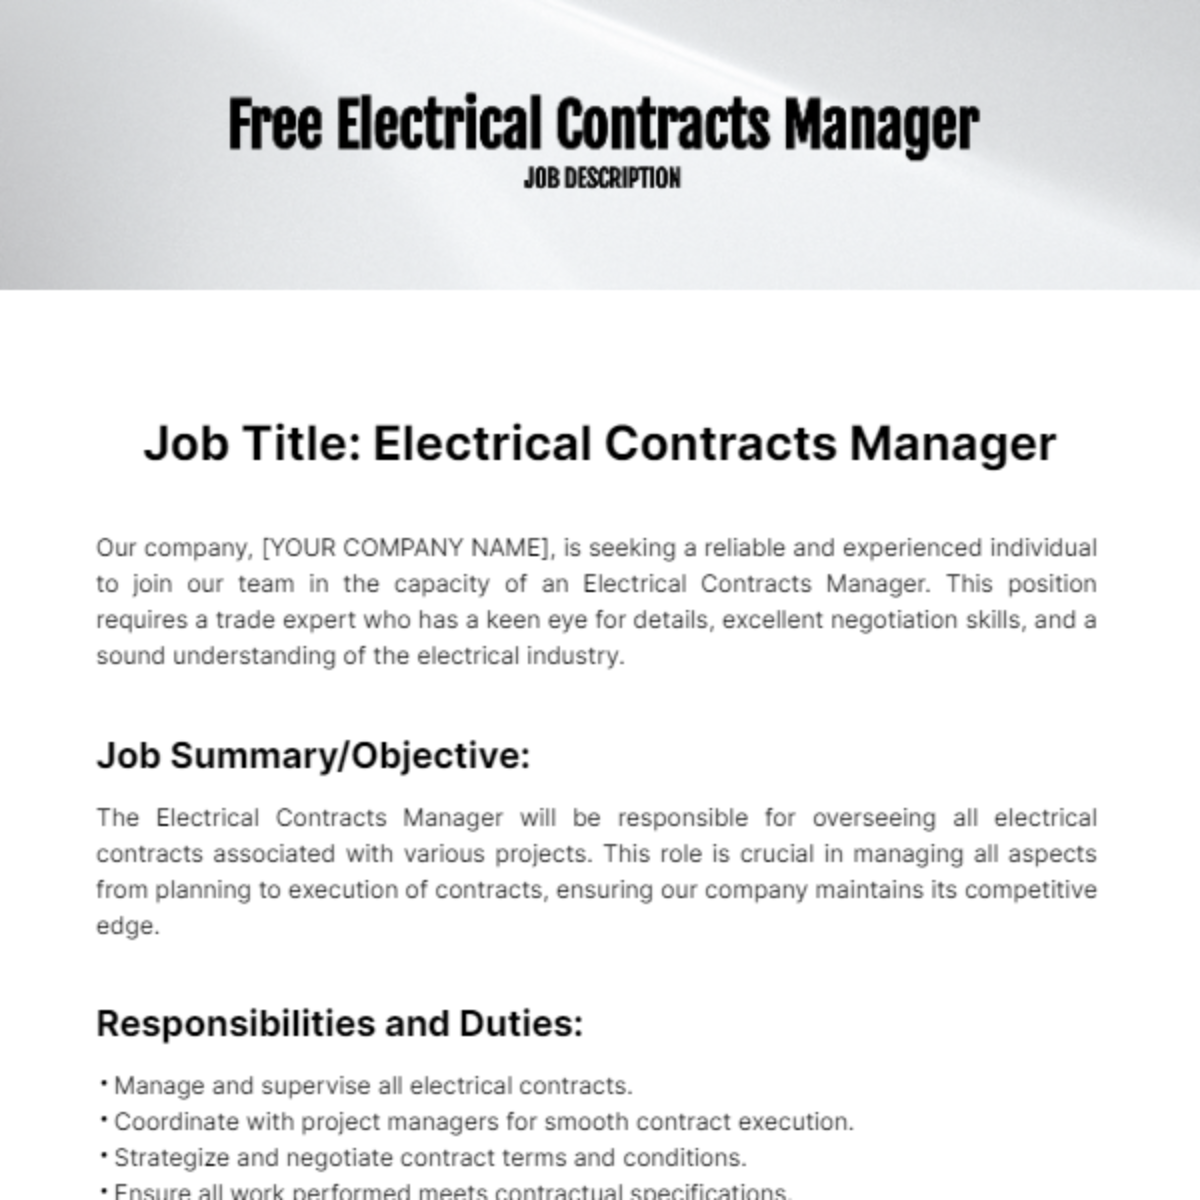 Free Electrical Contracts Manager Job Description Template